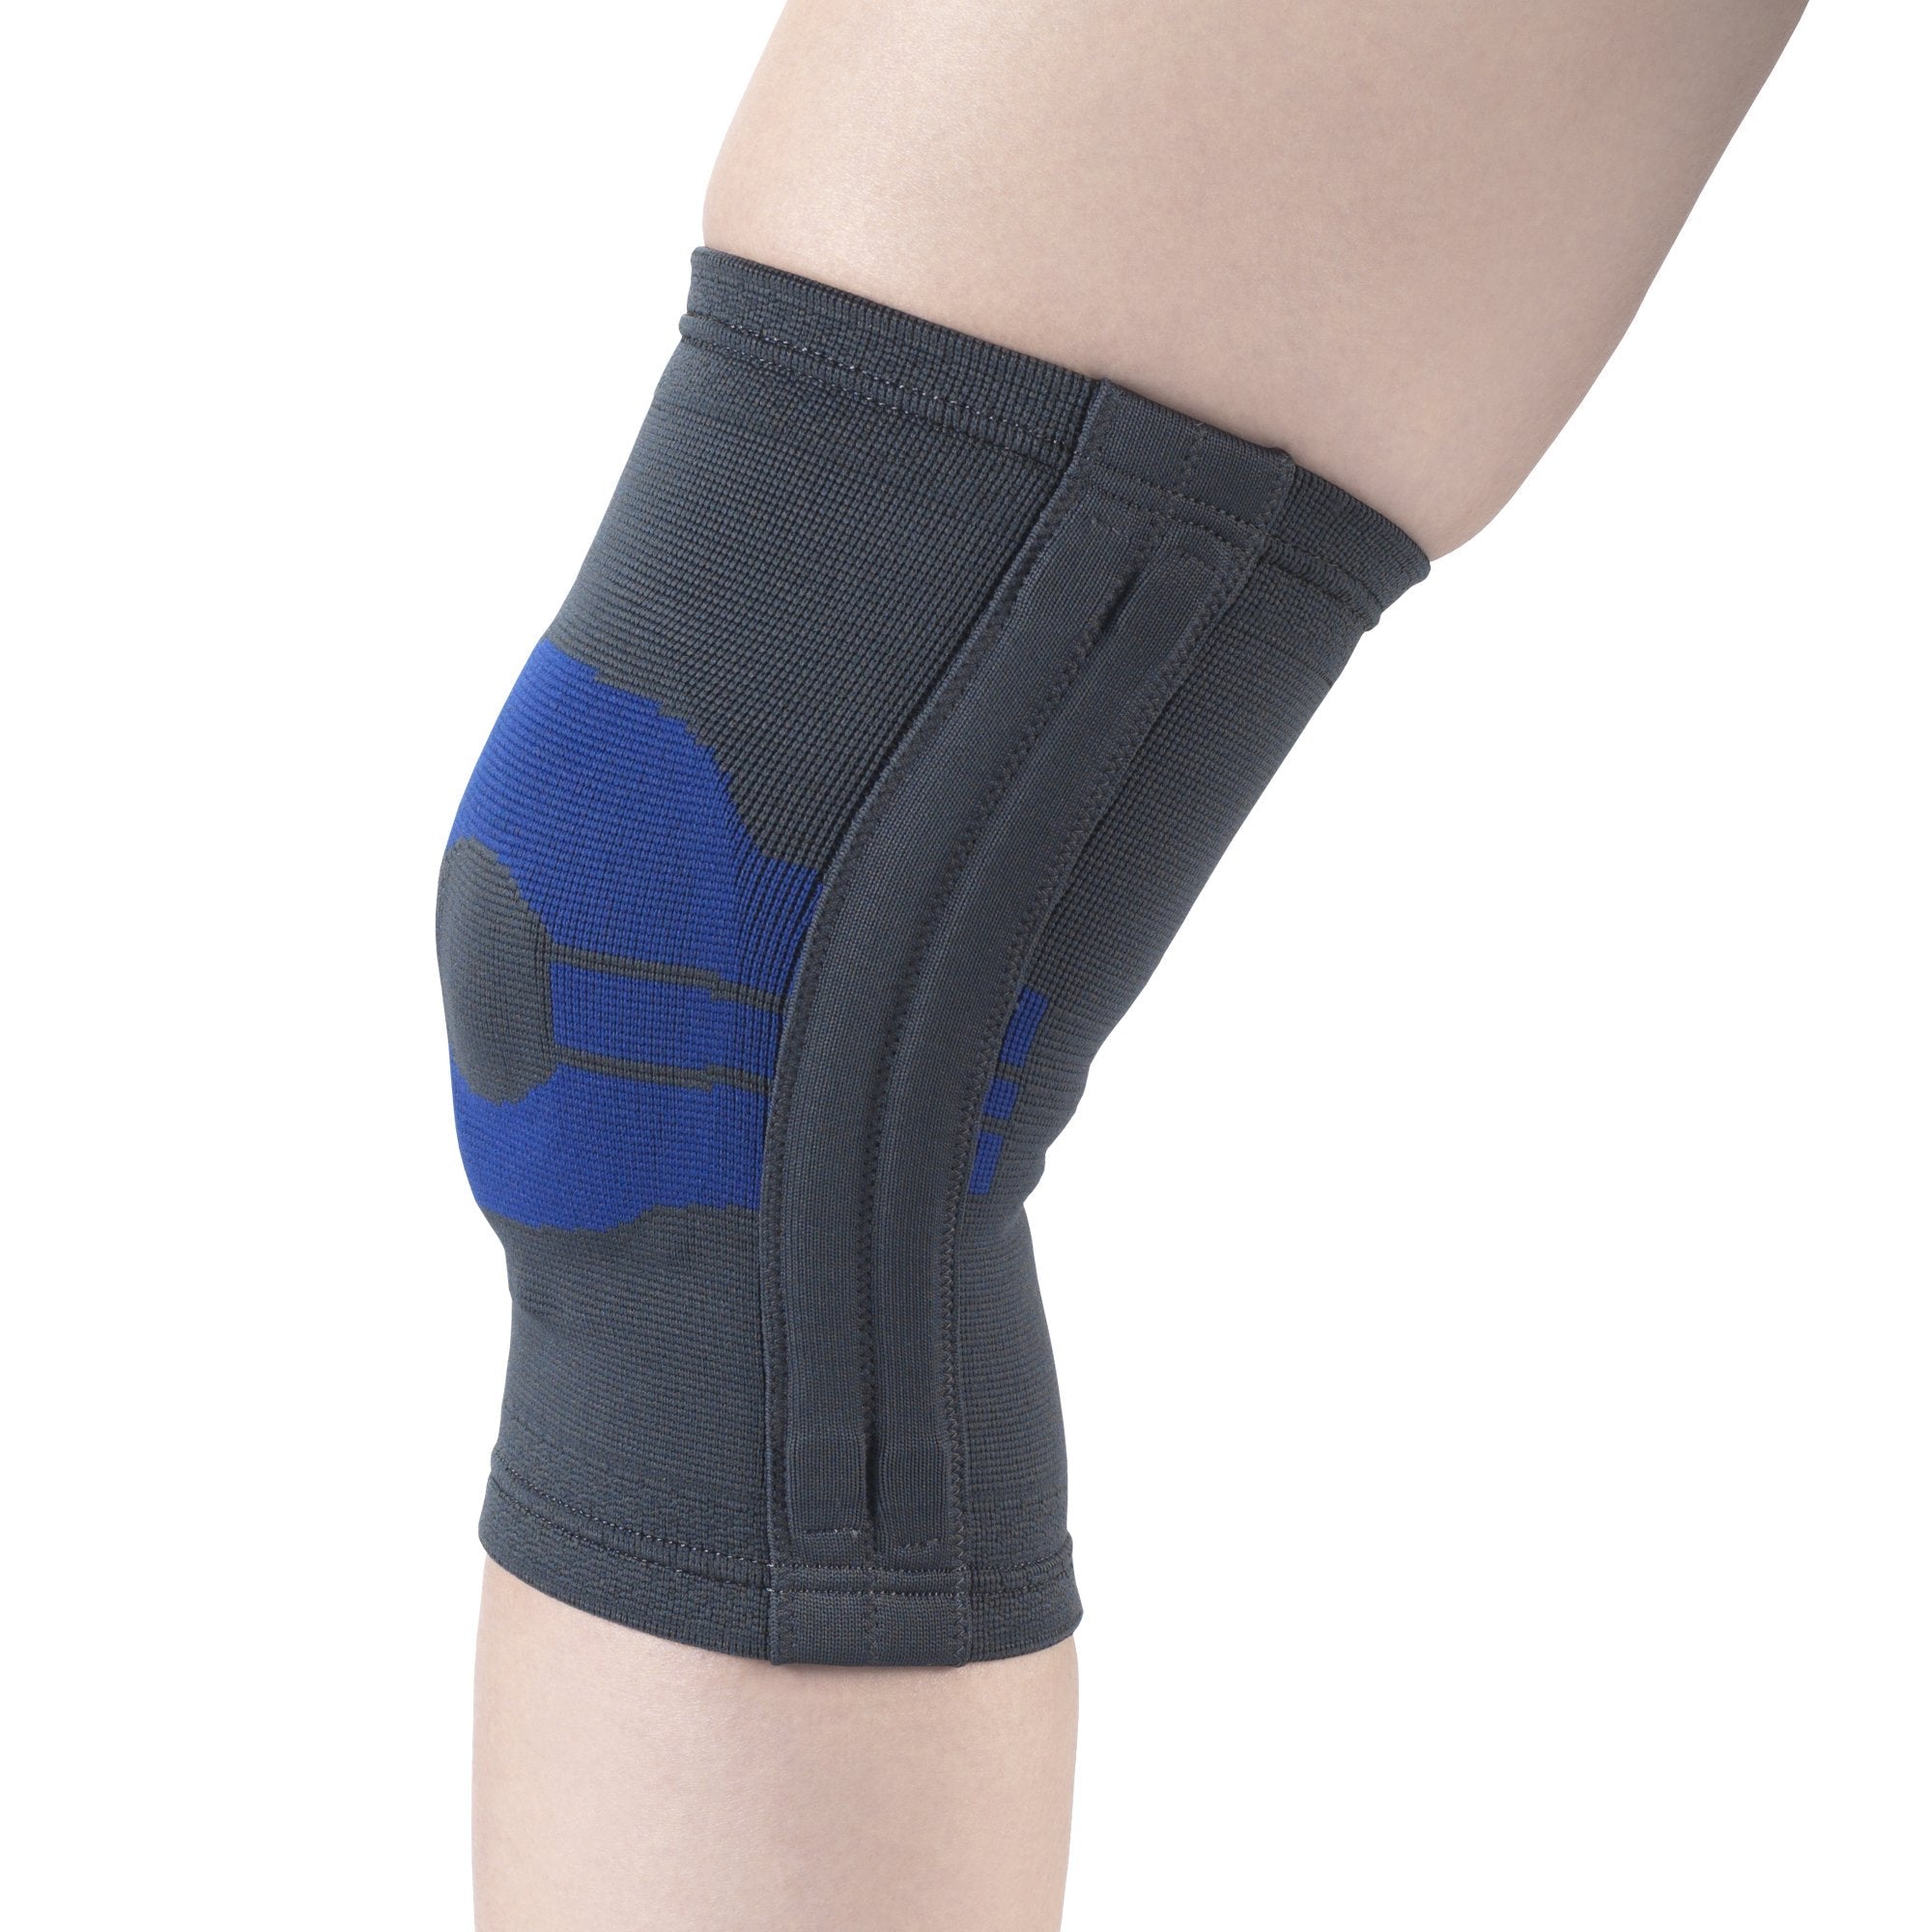 AIR 2435-L EA/1 ELASTIC KNEE SUPPORT WITH SIDE STAYS CHARCOAL, LARGE